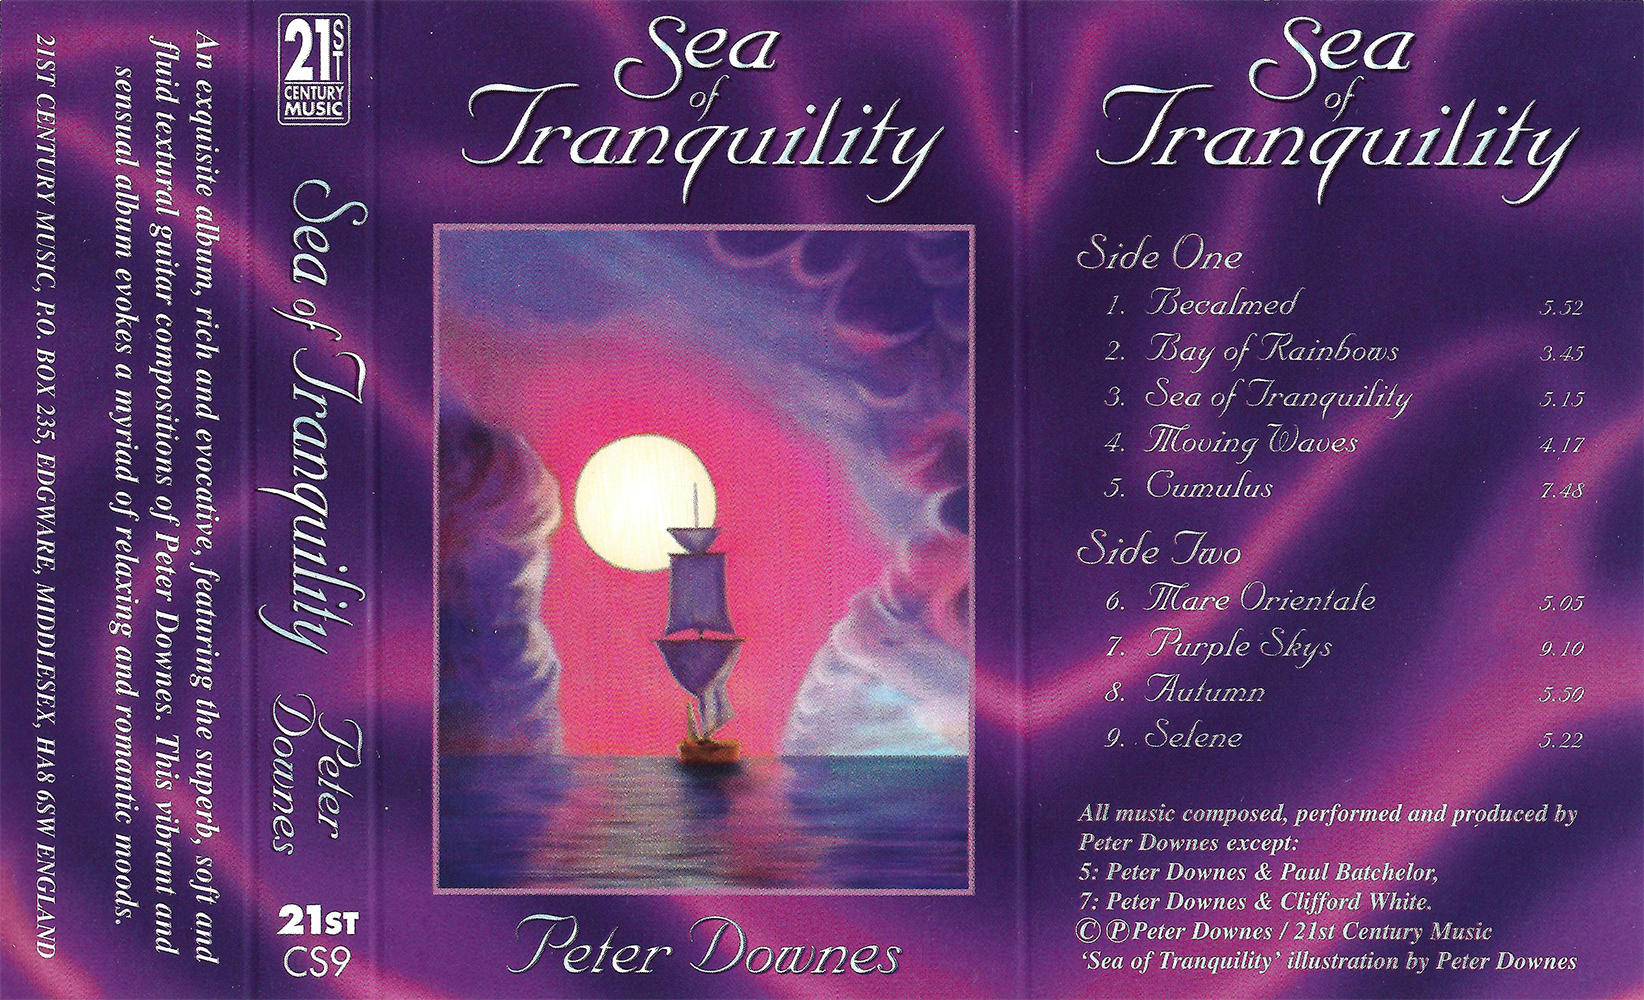 Sea of Tranquility by Peter Downes